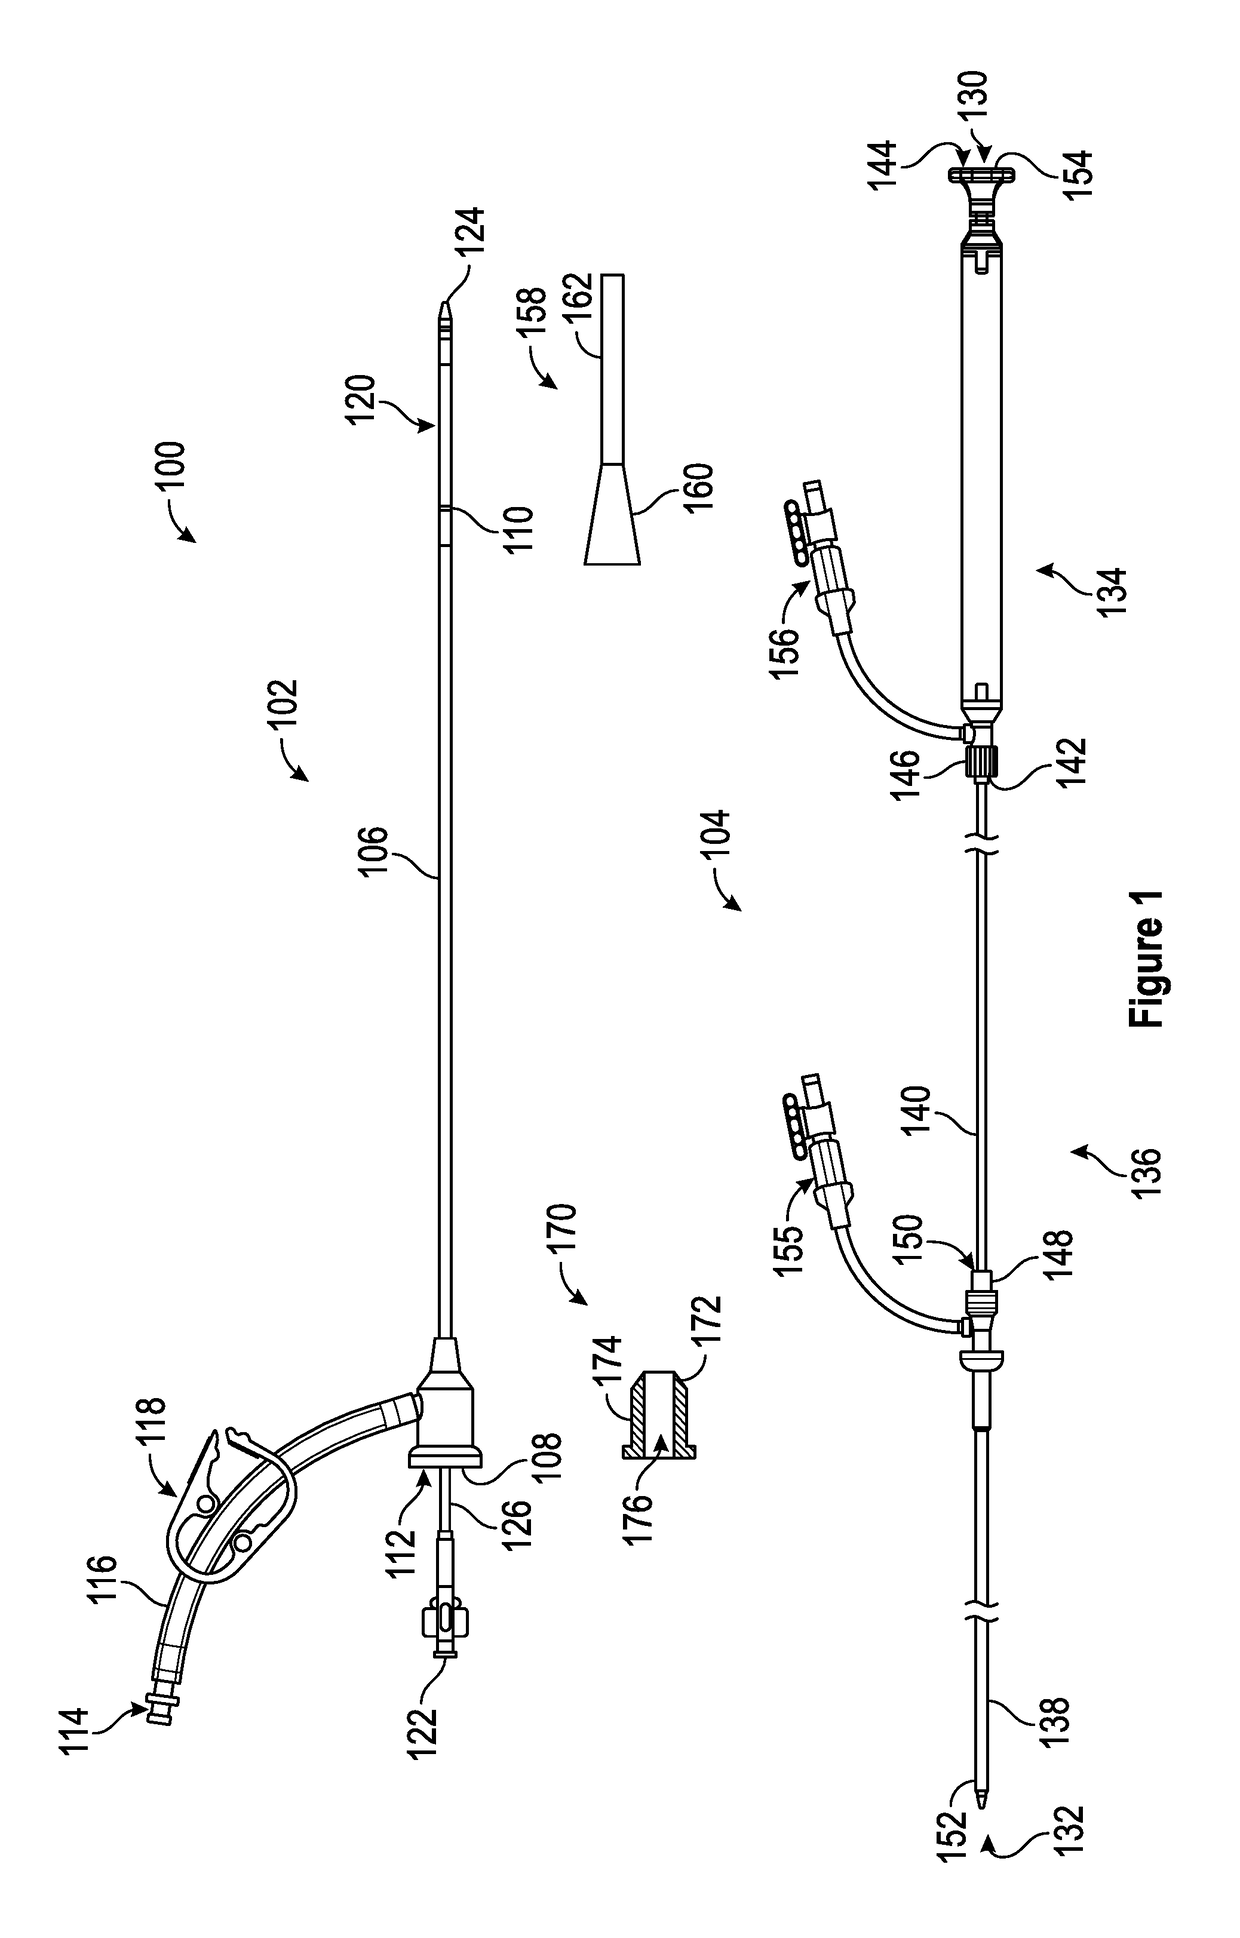 Intravascular treatment of vascular occlusion and associated devices, systems, and methods